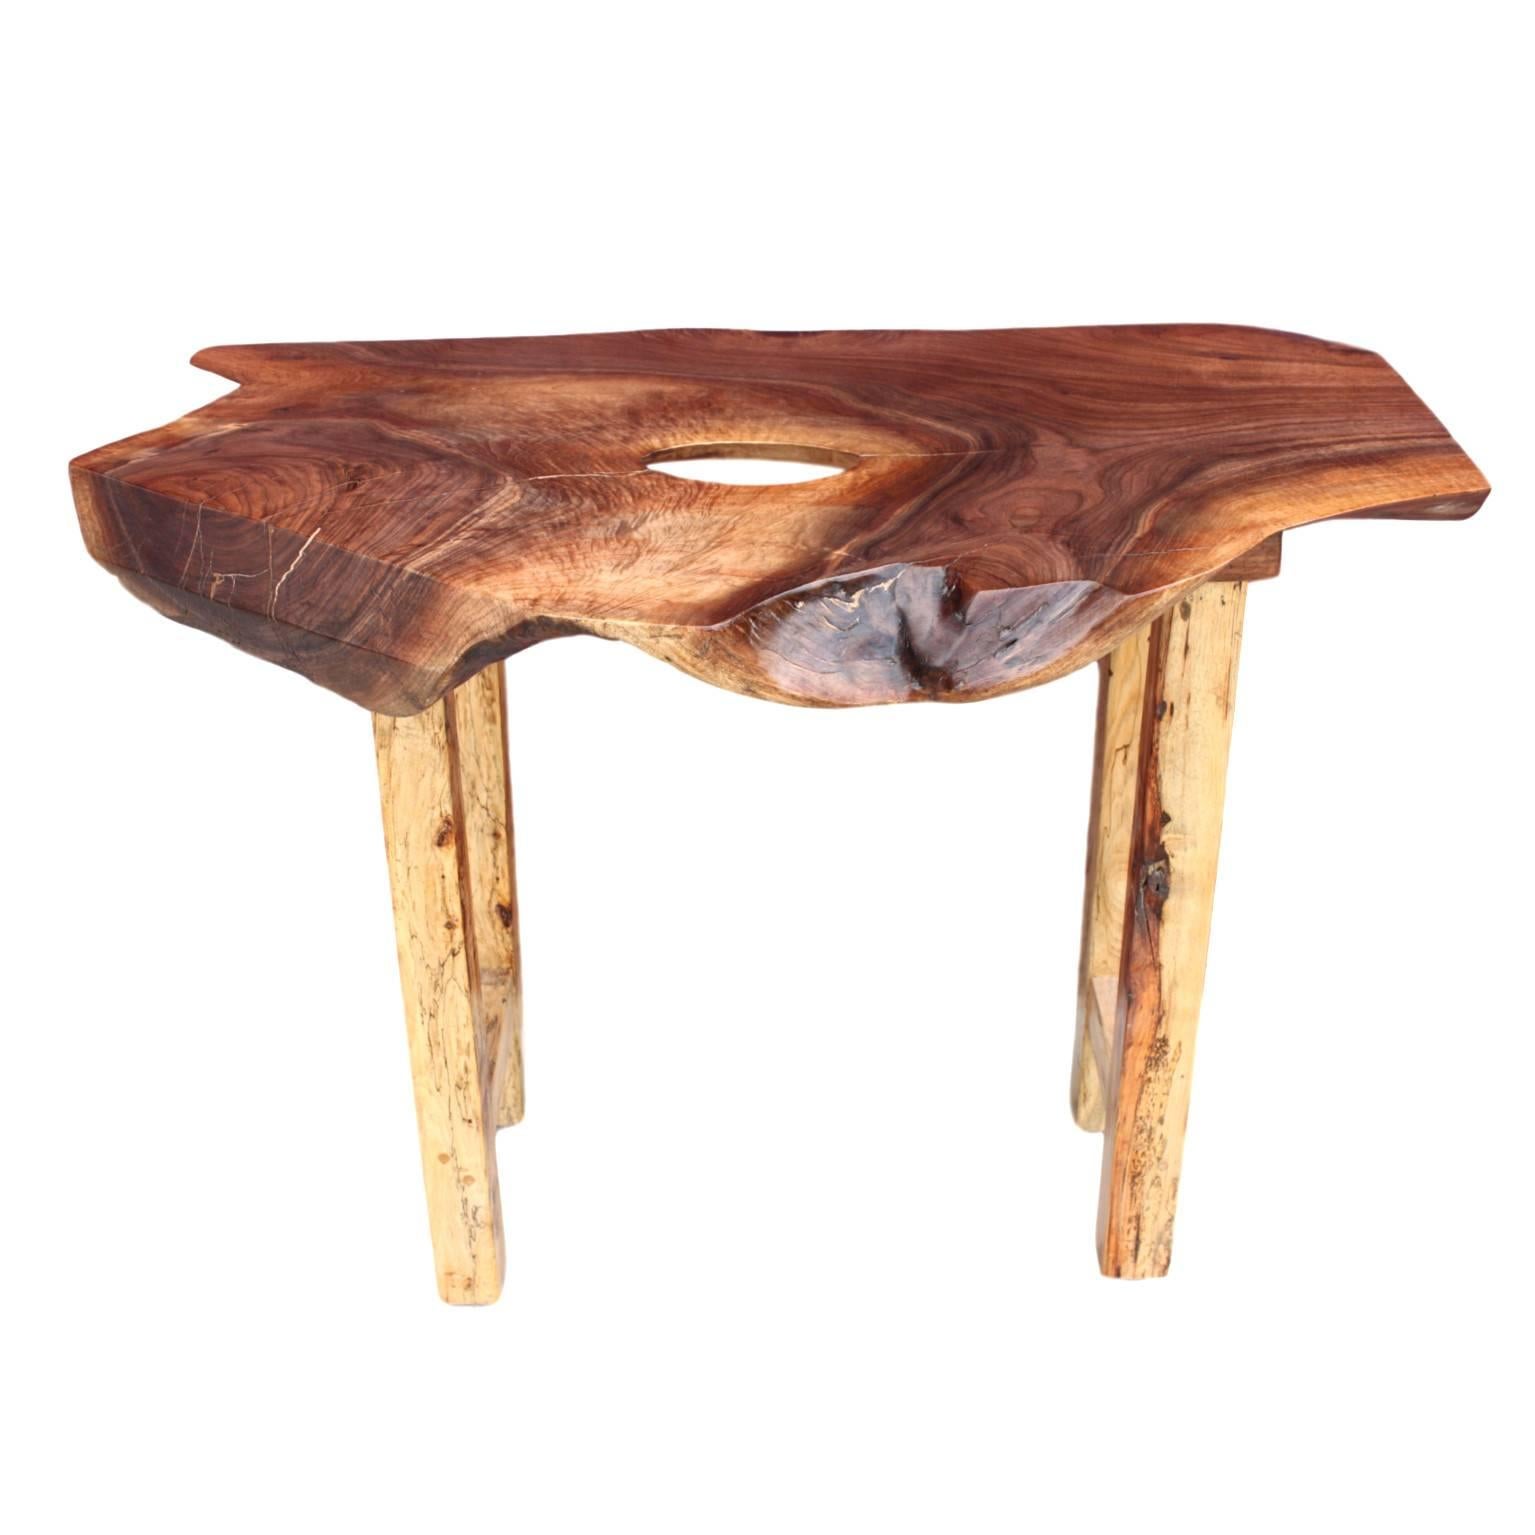 This wonderful little table was constructed in our workshop from solid walnut and maple. Top is a single 41" long slab of walnut retaining its wonderful organic edges on three of its four sides as well as a charming hole inclusion. A set of